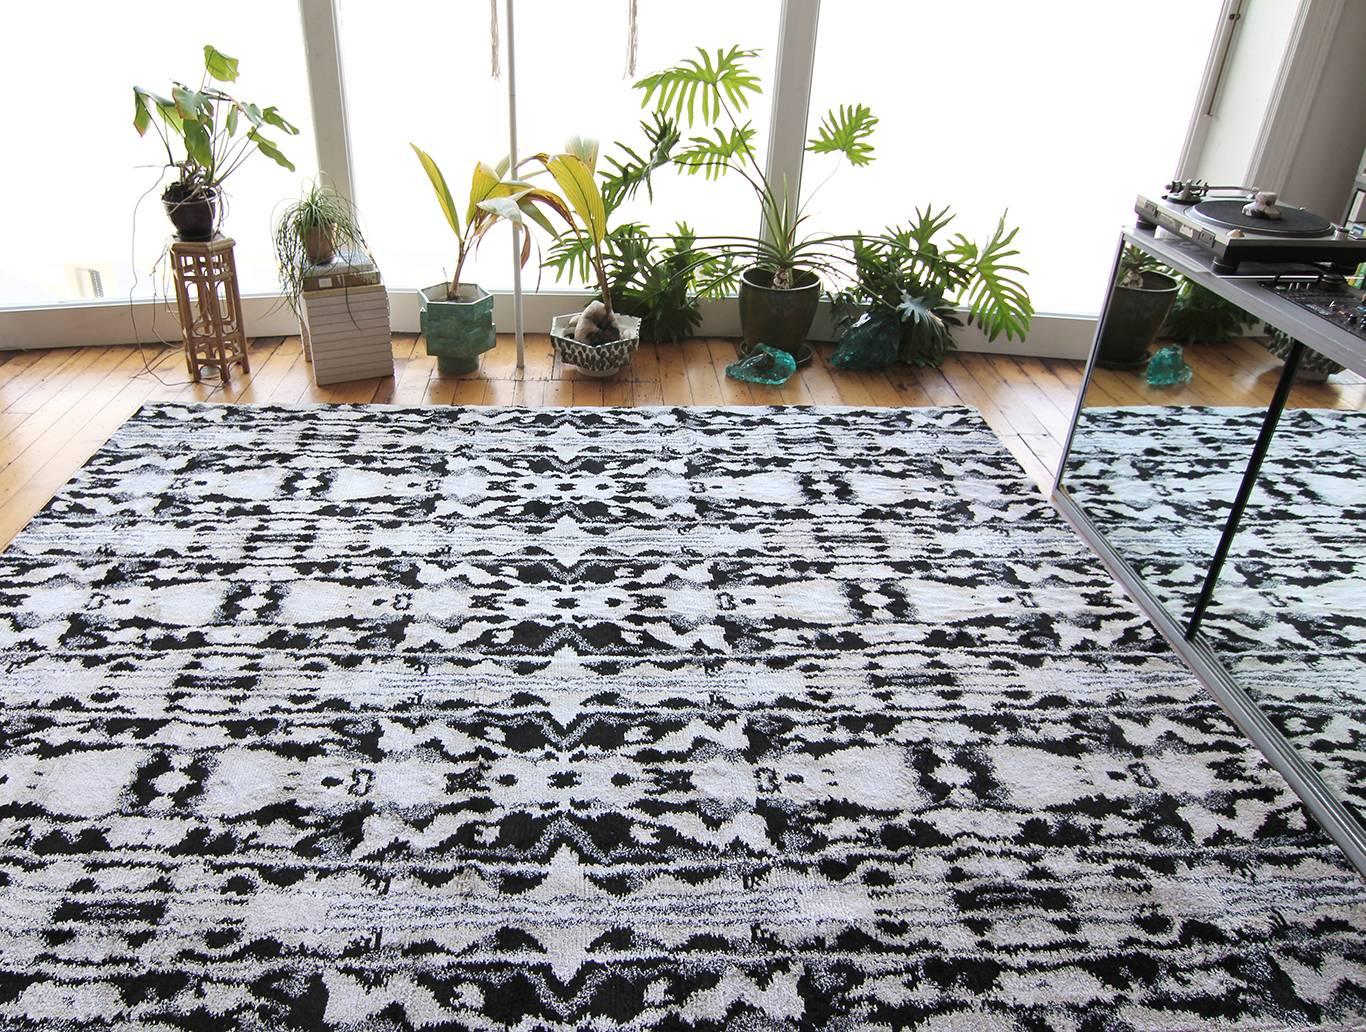 Rug pattern: Biami, black
Material: 100% silk
Quality: semi-shaggy Lulu weave 30mm pile, hand-knotted
Size: 8’ x 10'
Made in Nepal
Designed by Eskayel.
 